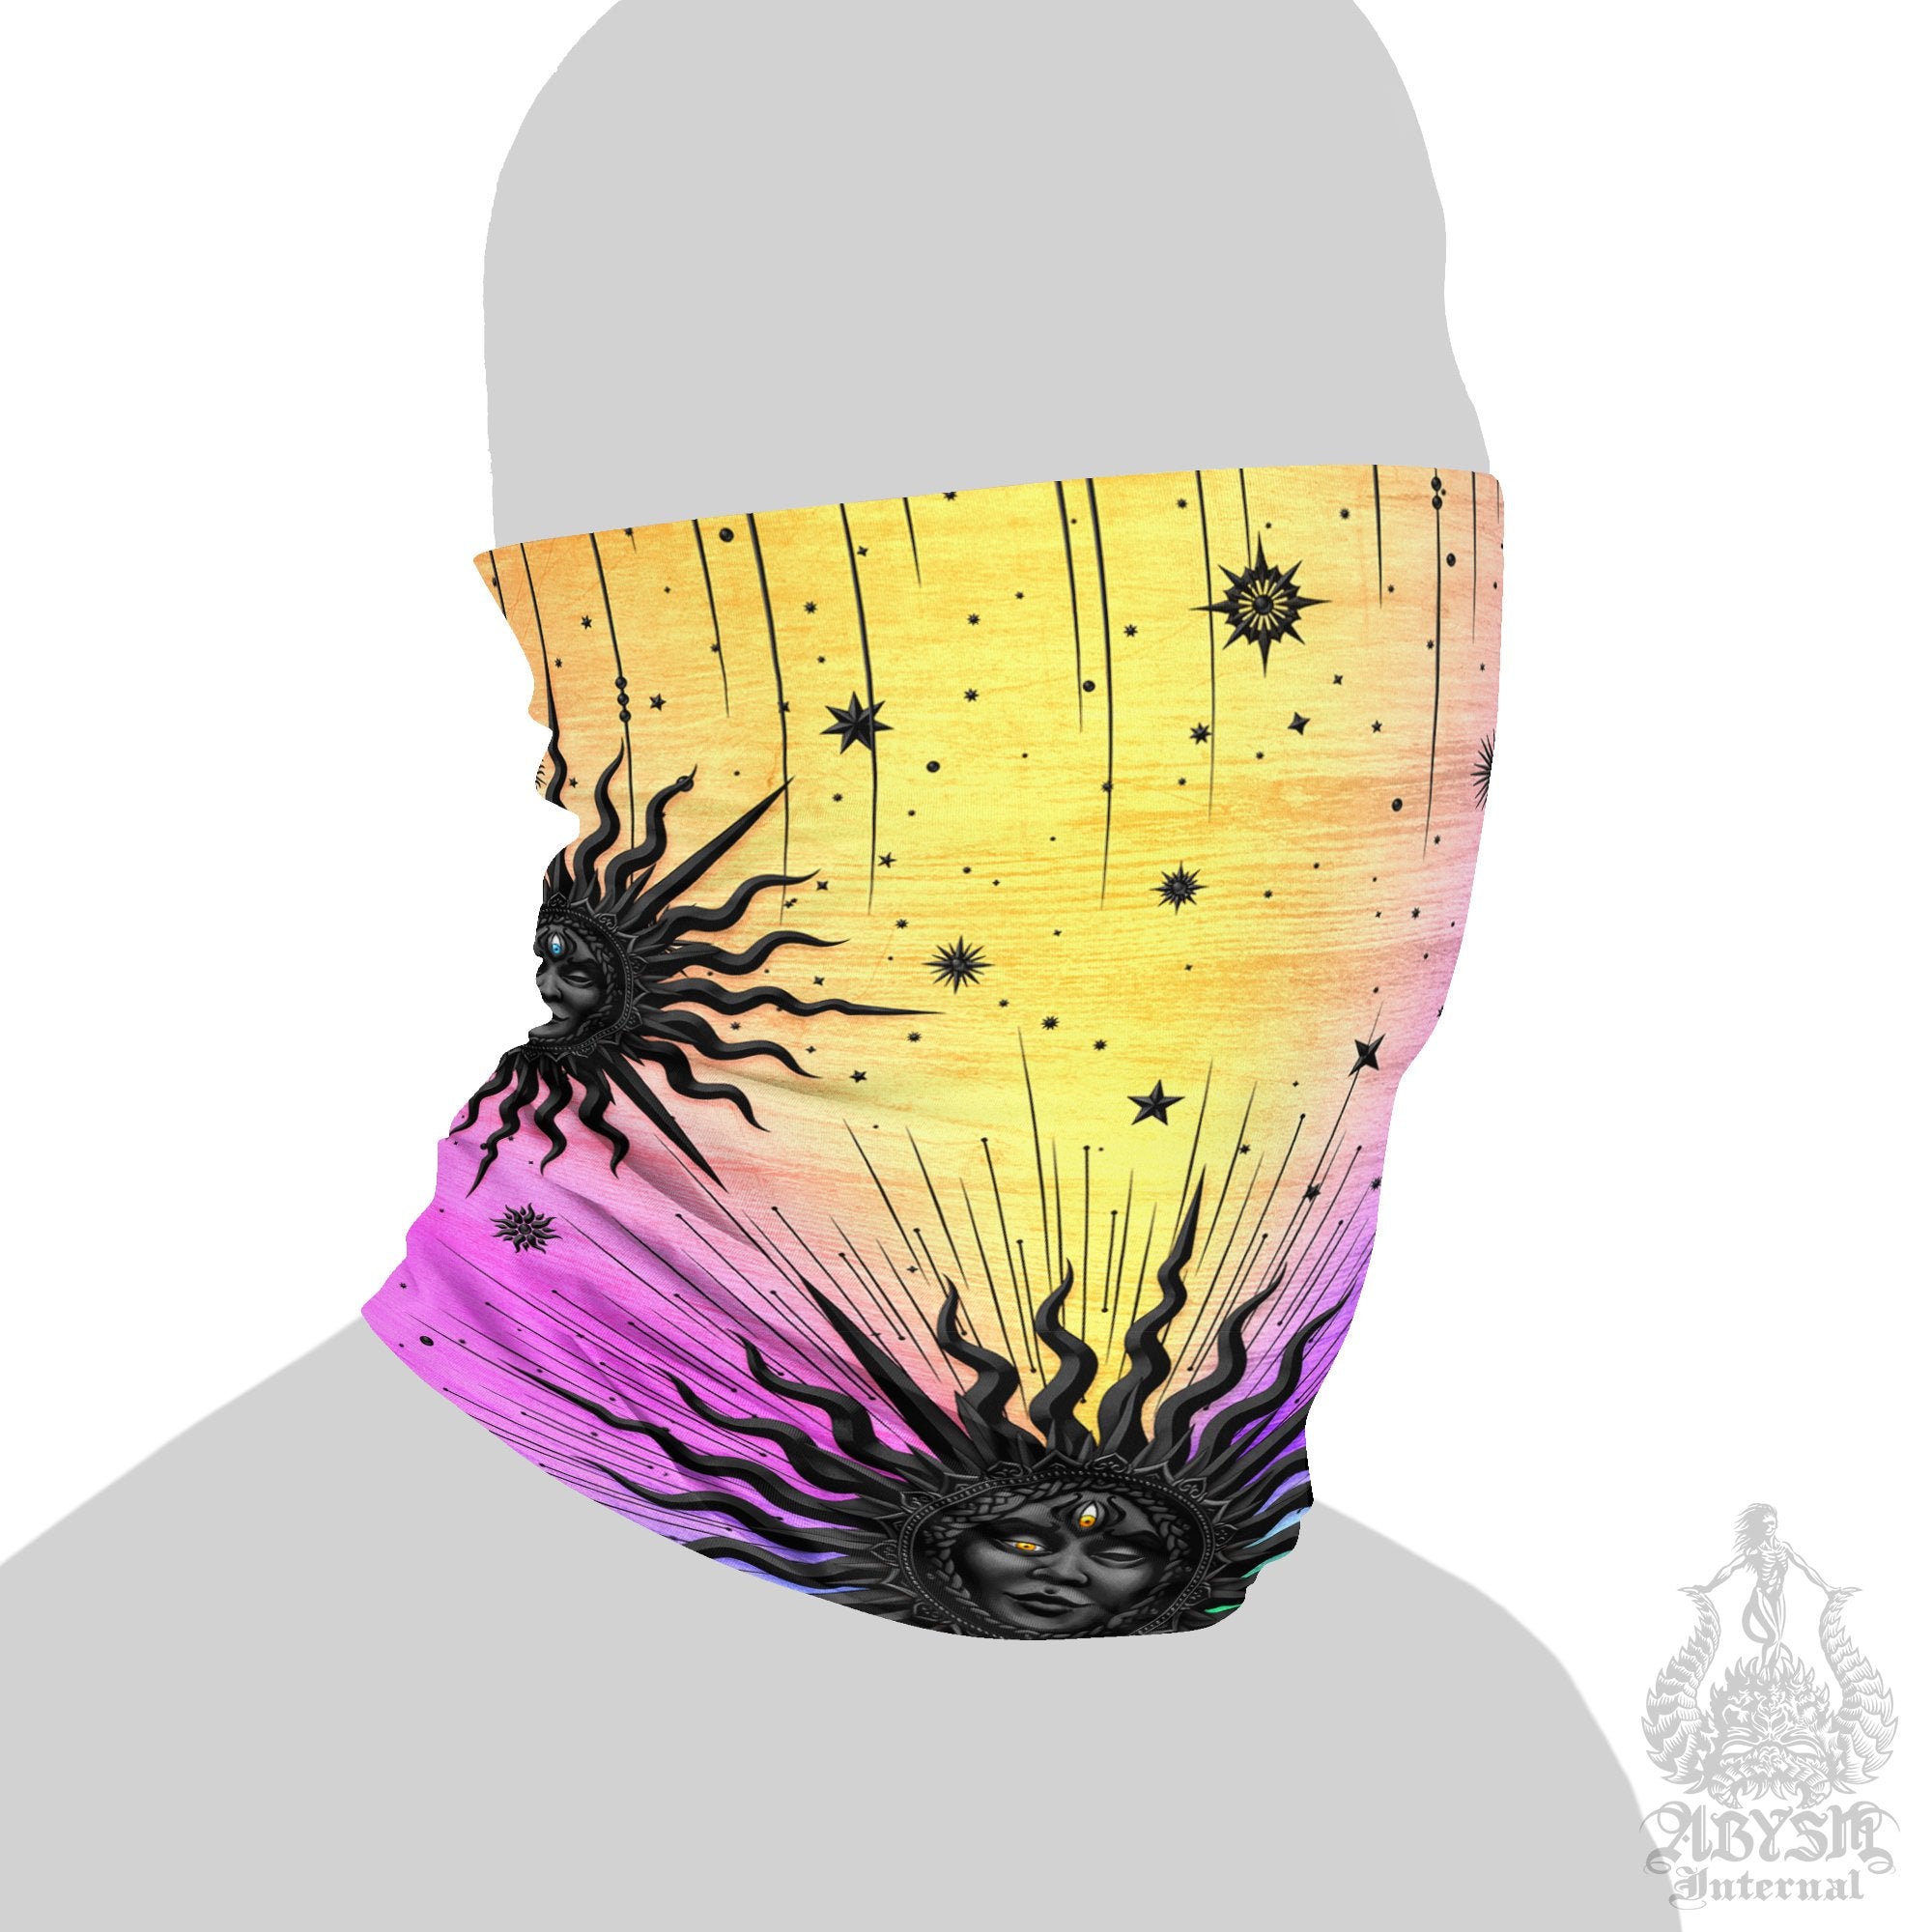 Trippy Neck Gaiter, Psychedelic Tarot Arcana Sun Face Mask, Pastel Printed Head Covering, Colorful Indie Outfit - Black - Abysm Internal